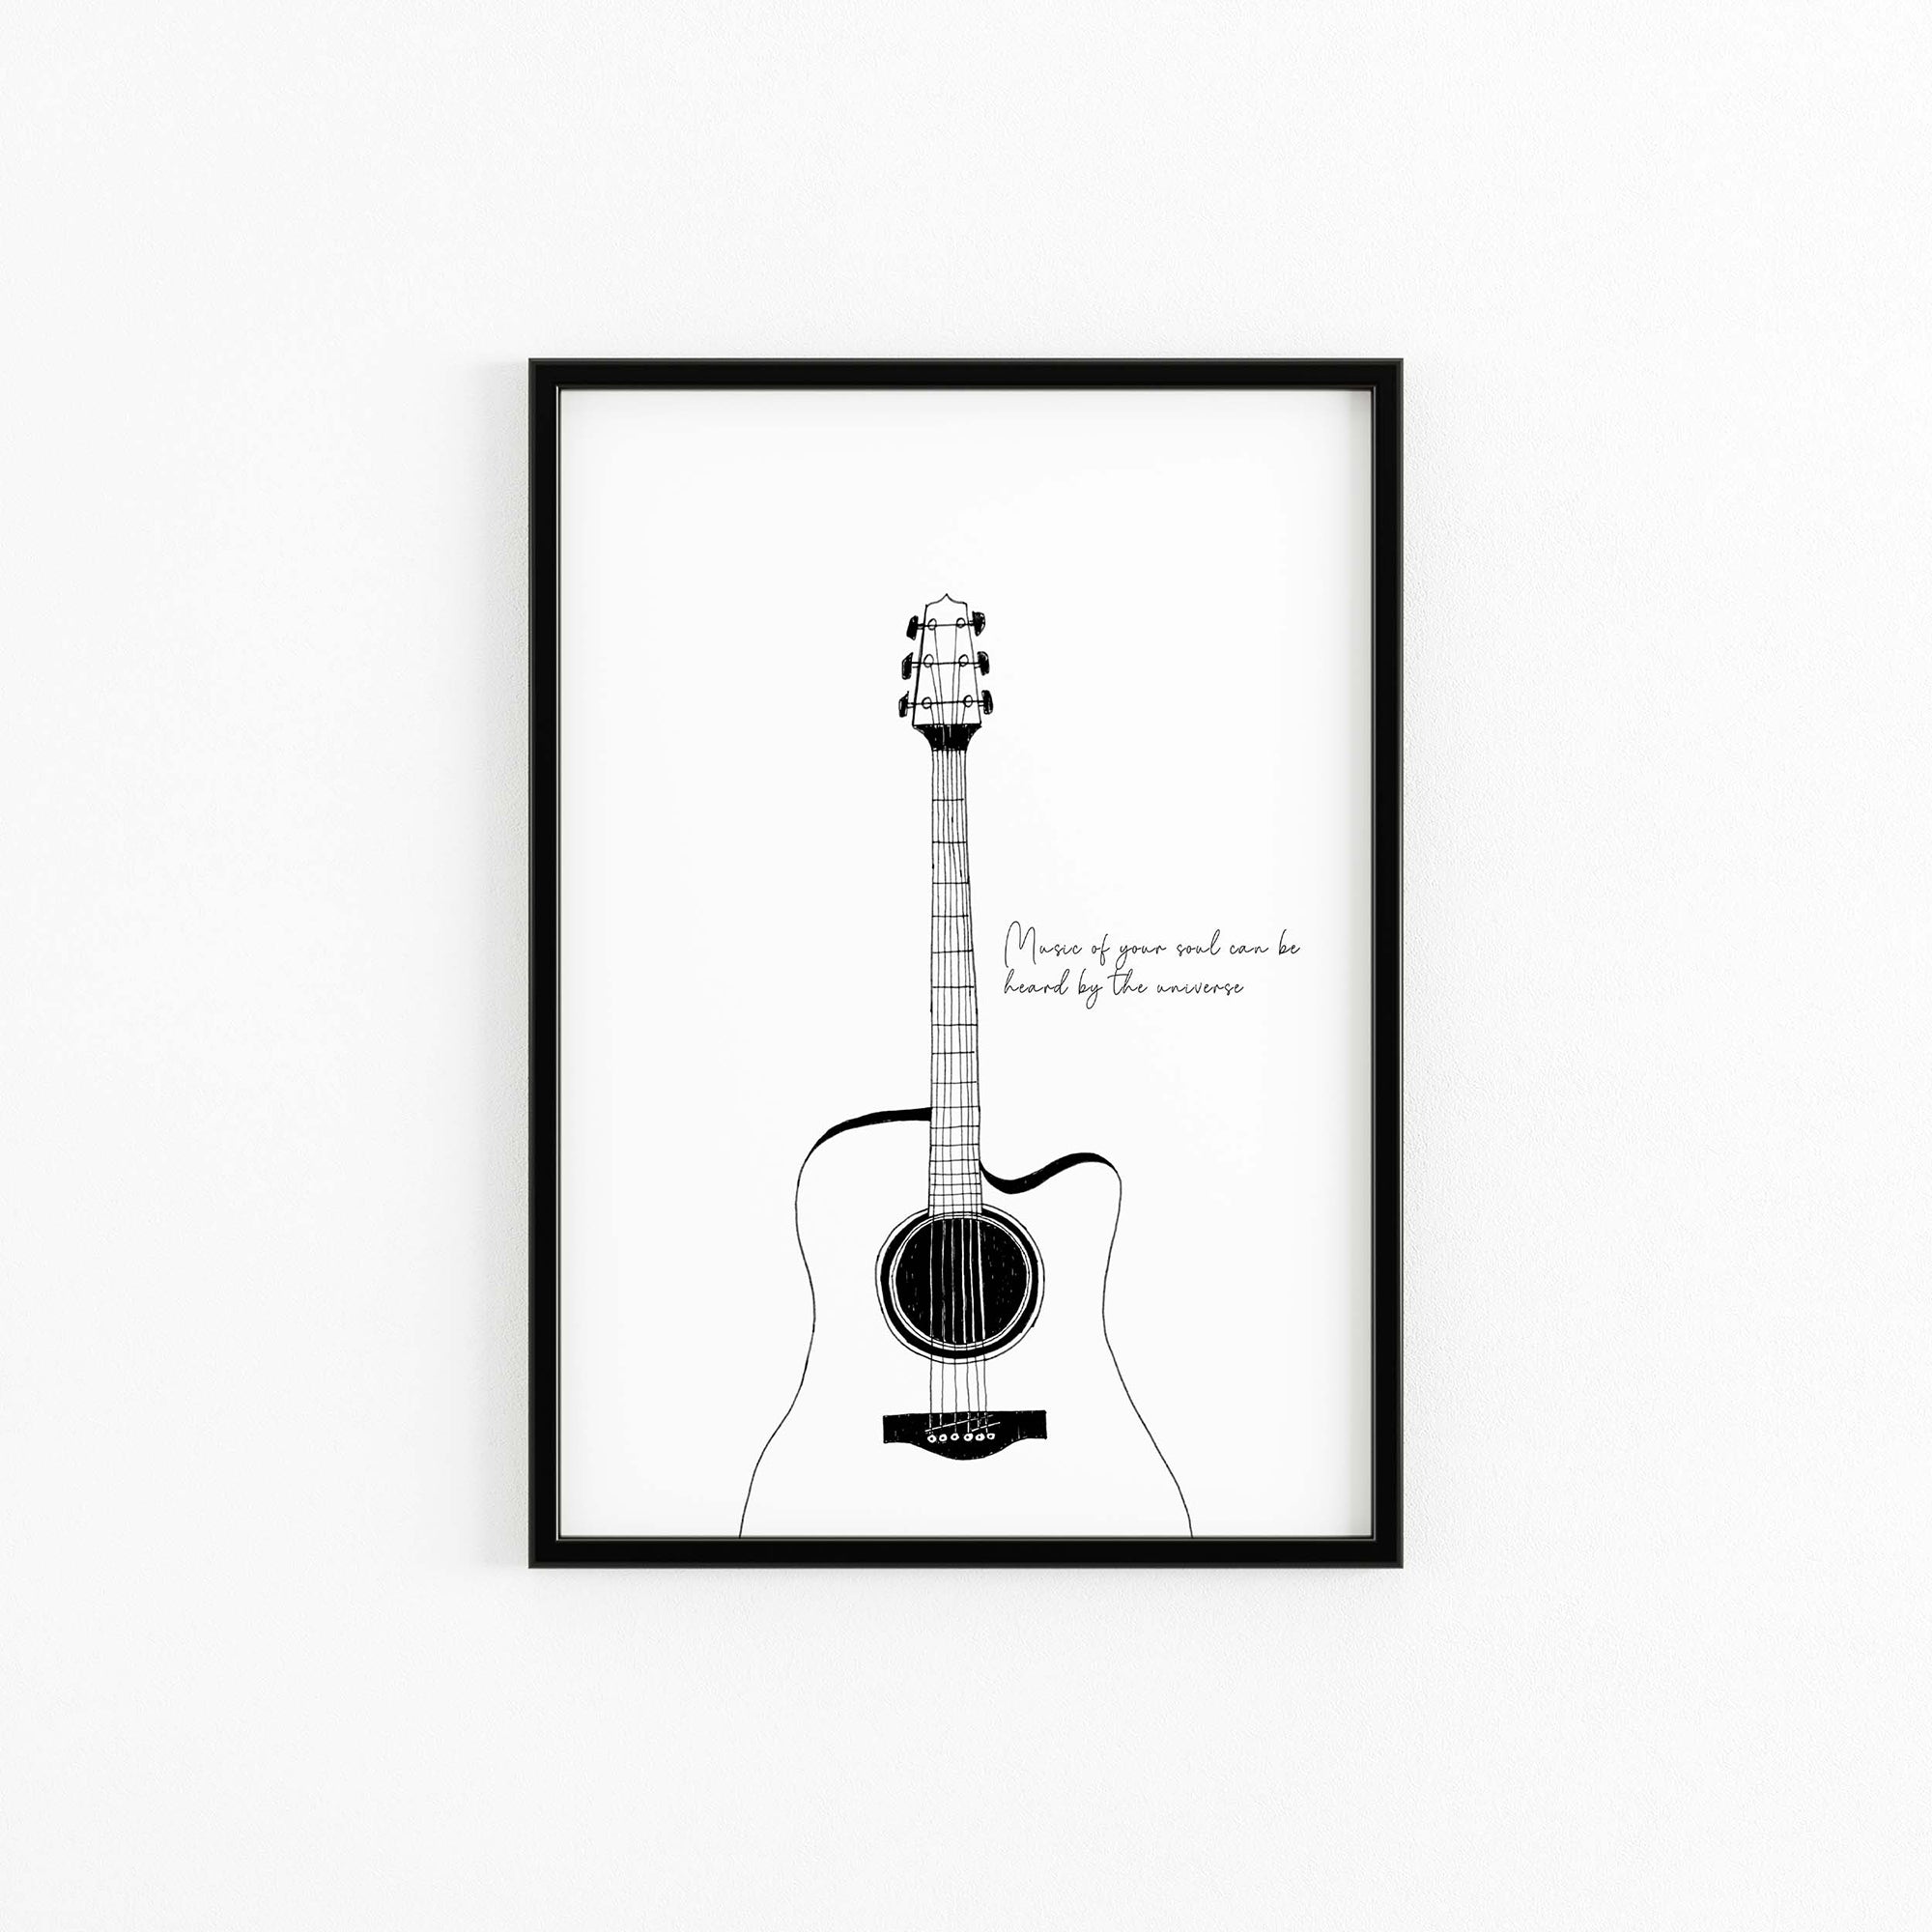 Music of your soul can be heard by the universe poster guitar black and white elemente design